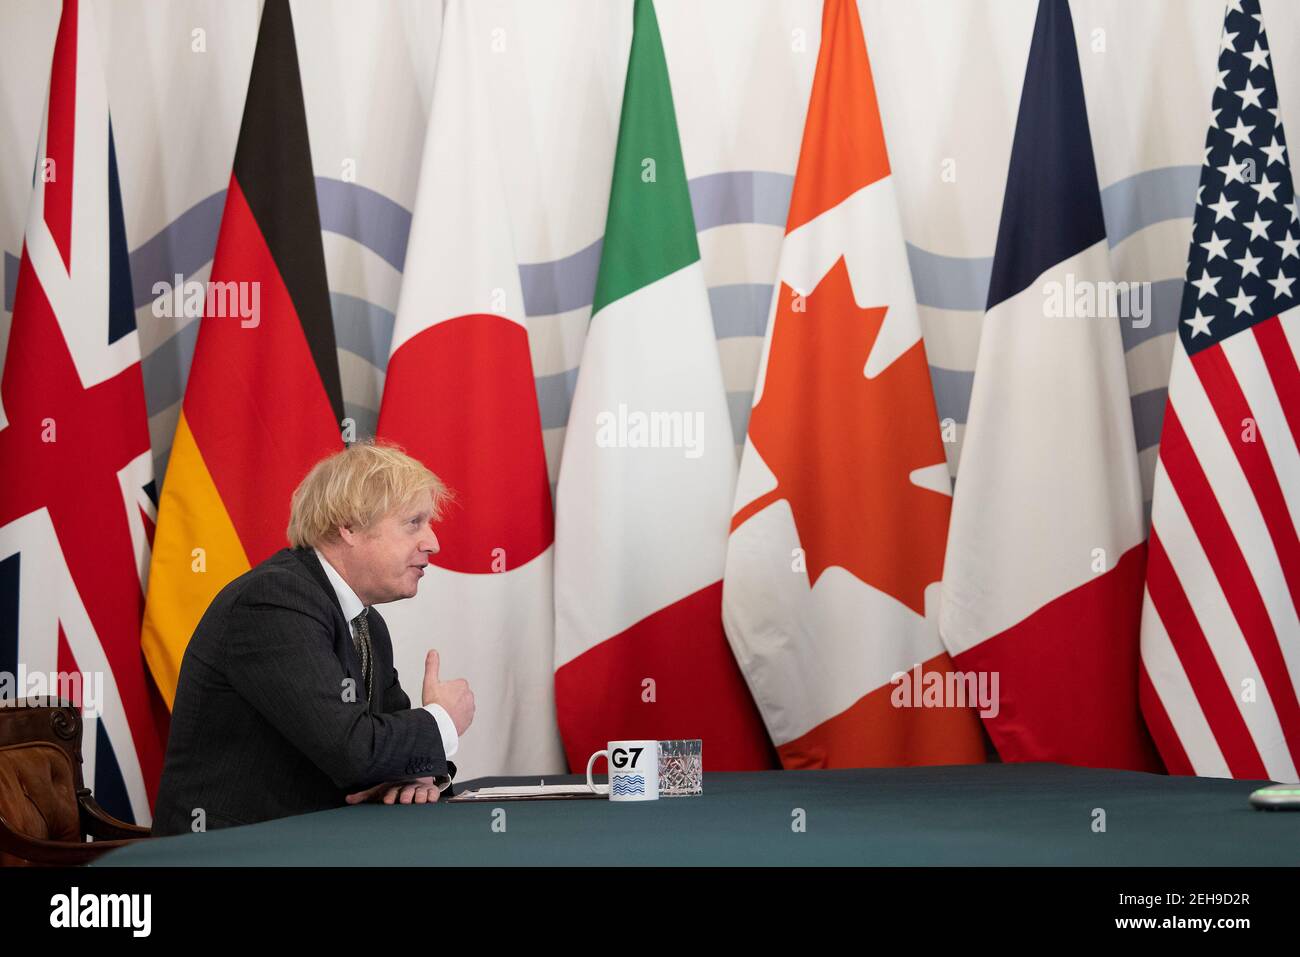 London, UK. 19th Feb 2021.  British Prime Minister Boris Johnson speaks during a virtual meeting of the leaders of the Group of Seven at Downing Street in London, Britain, on Feb. 19, 2021. The leaders of the Group of Seven (G7) on Friday pledged to cooperate with the Group of 20 (G20) and other international institutions on a range of global issues including fighting coronavirus pandemic, climate change and upholding the rules-based multilateral trading system, sending signals that the G7 will be committed to multilateral cooperation. Stock Photo